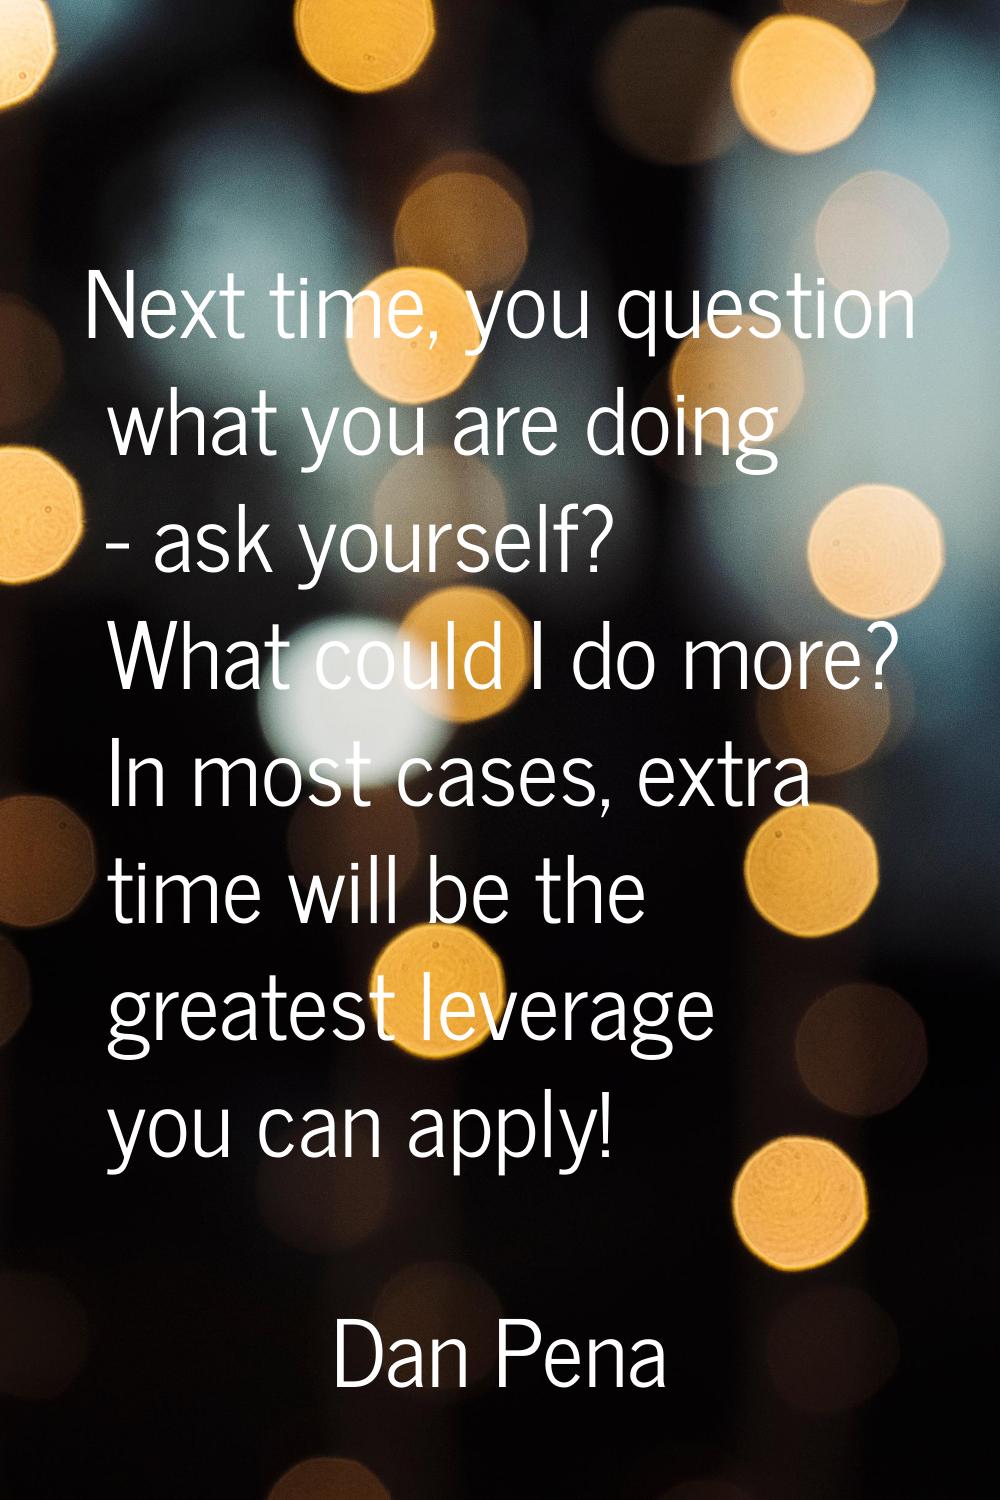 Next time, you question what you are doing - ask yourself? What could I do more? In most cases, ext